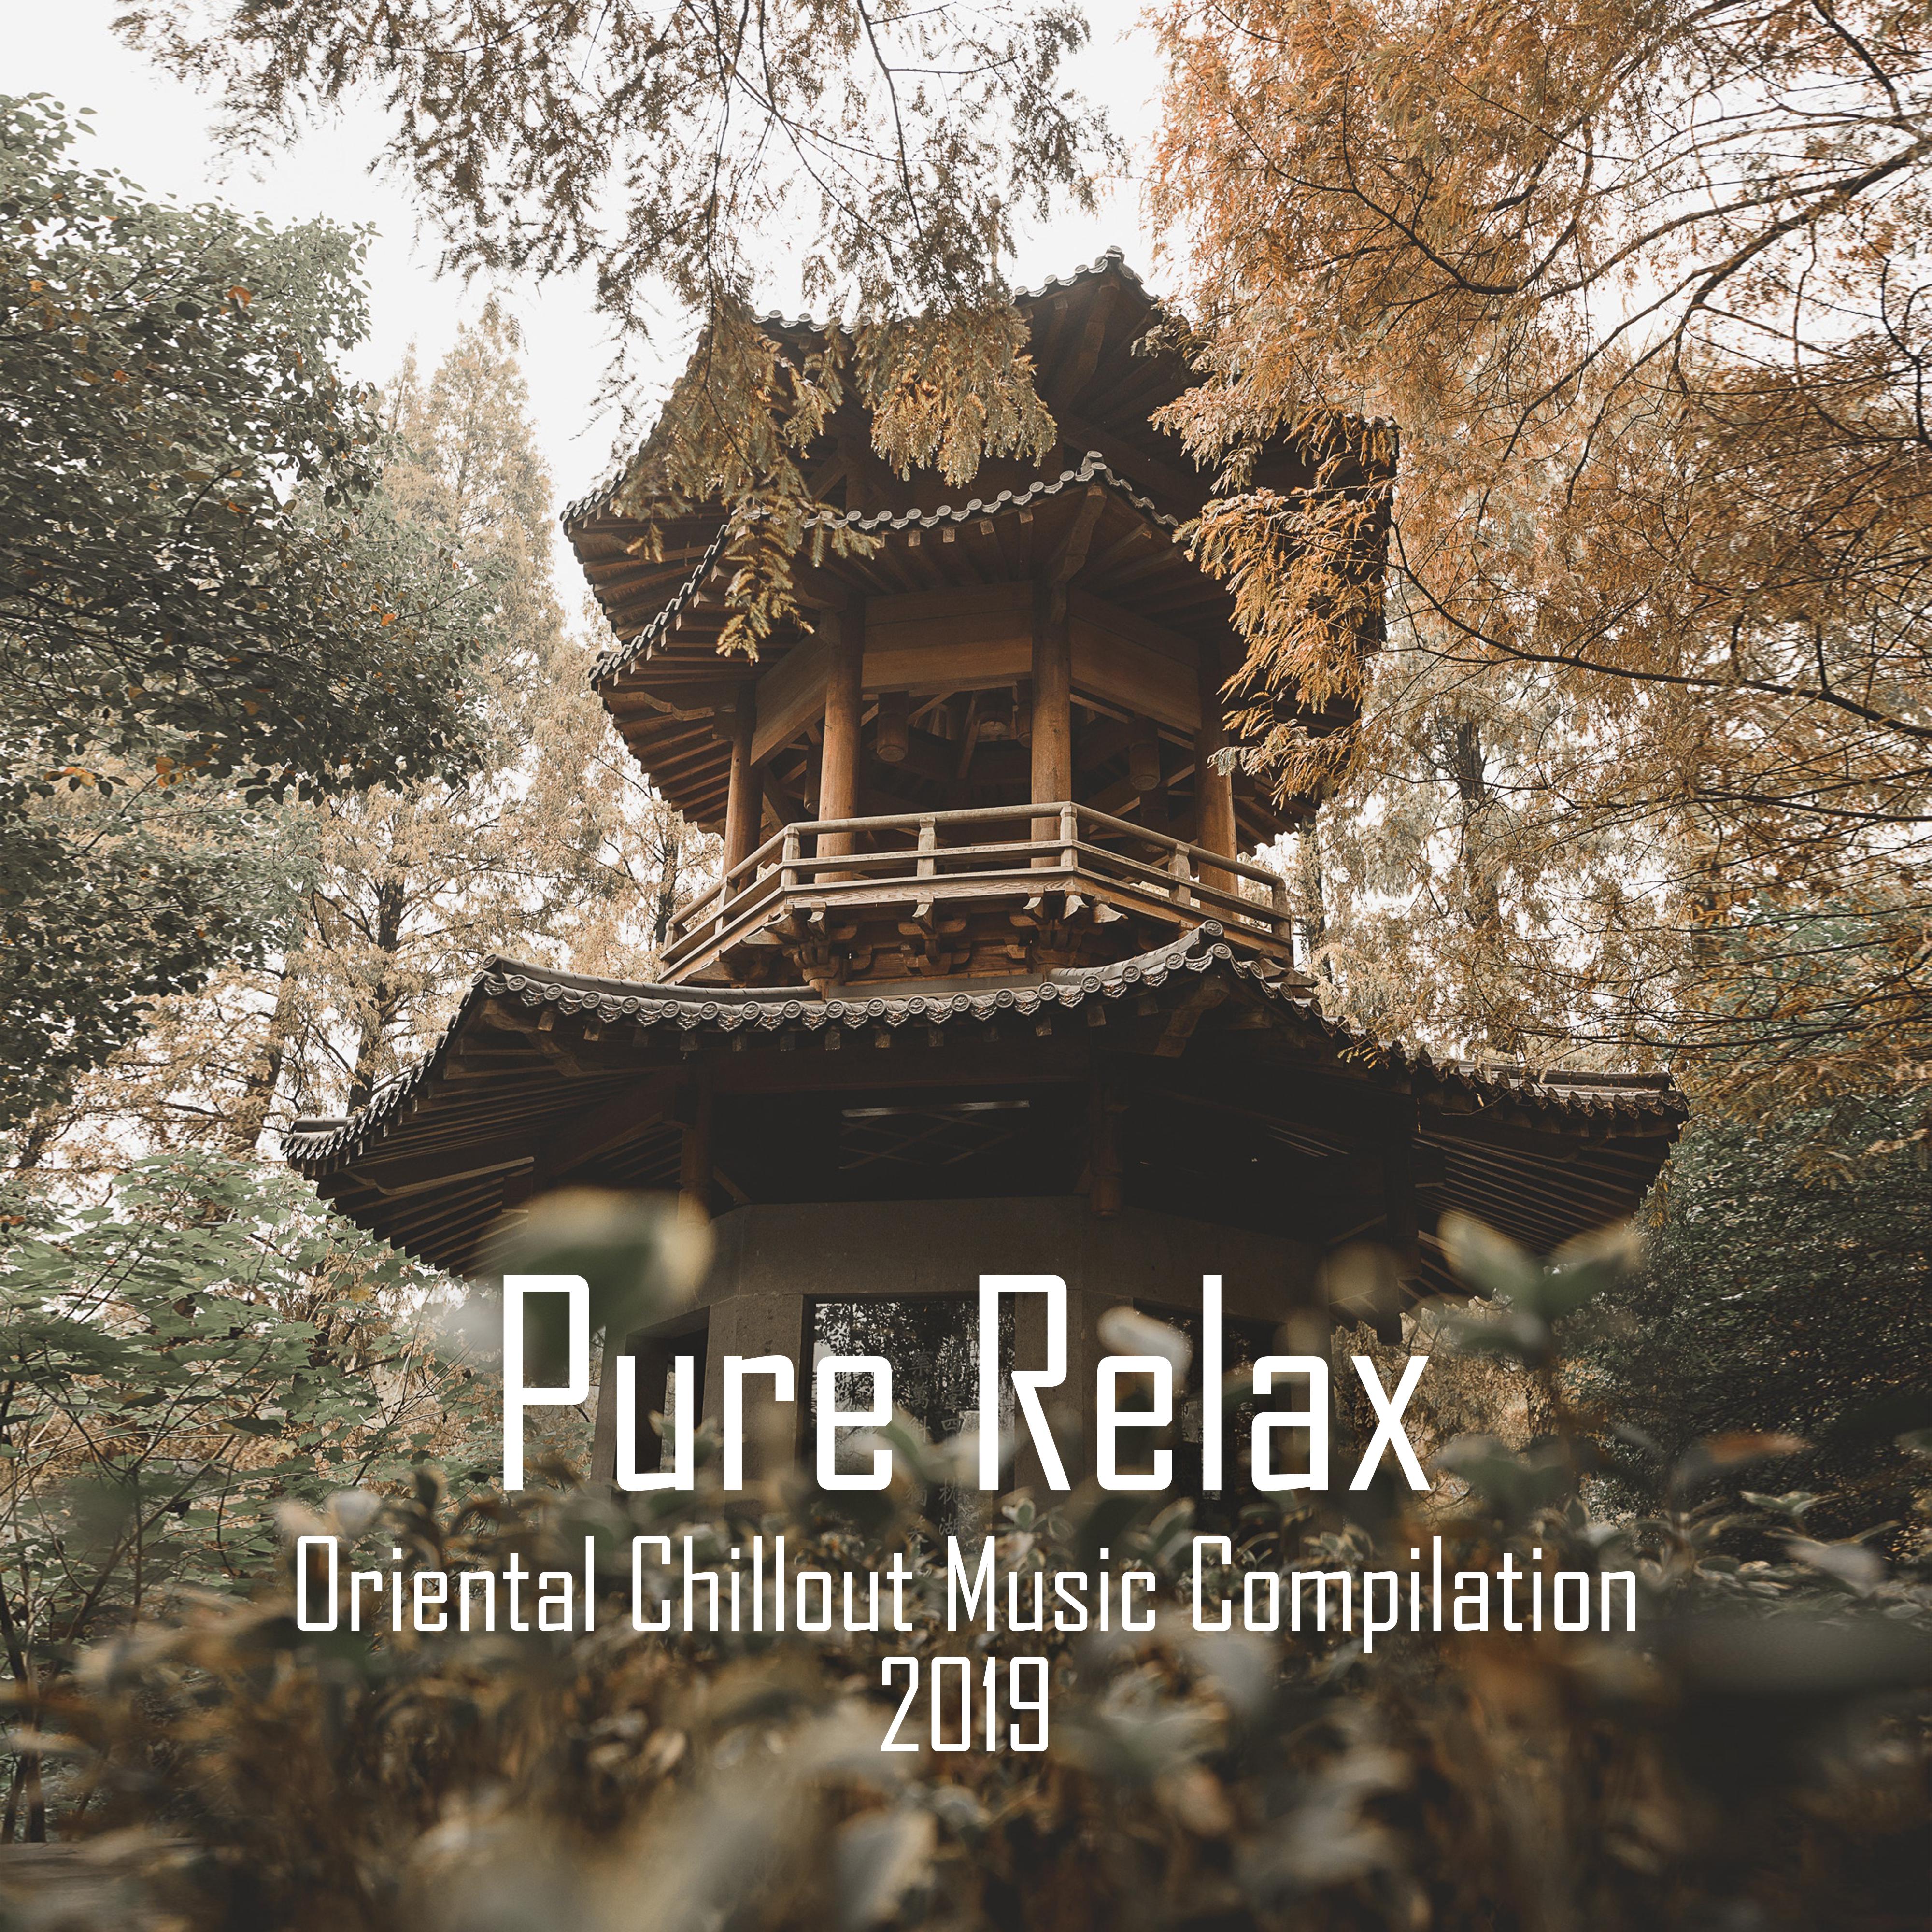 Pure Relax Oriental Chillout Music Compilation 2019